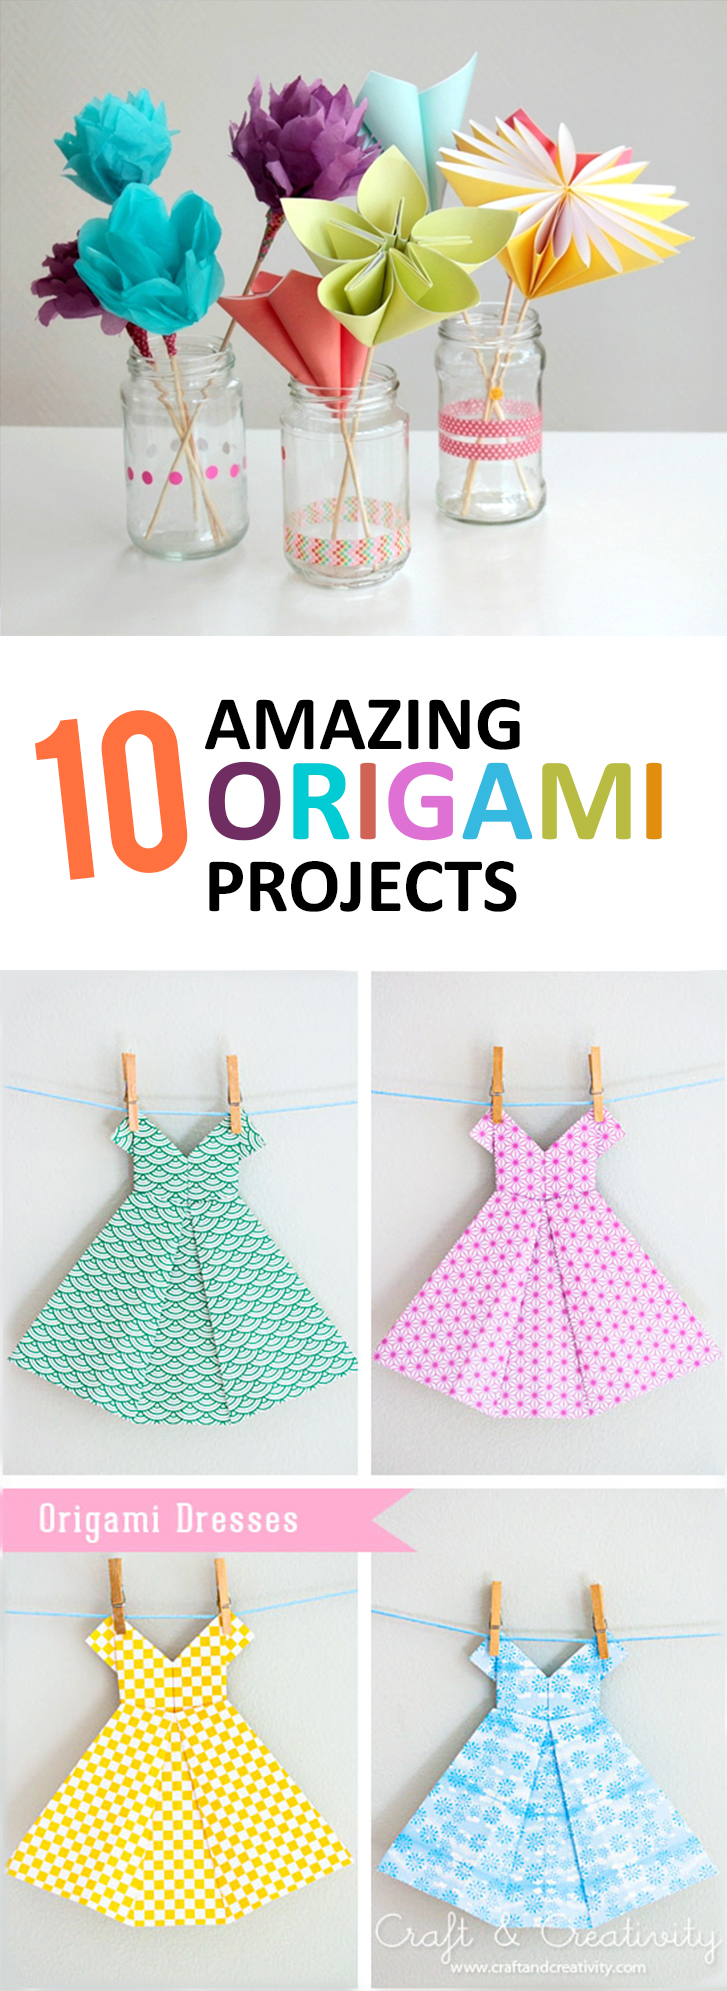 10 Amazing Origami Projects